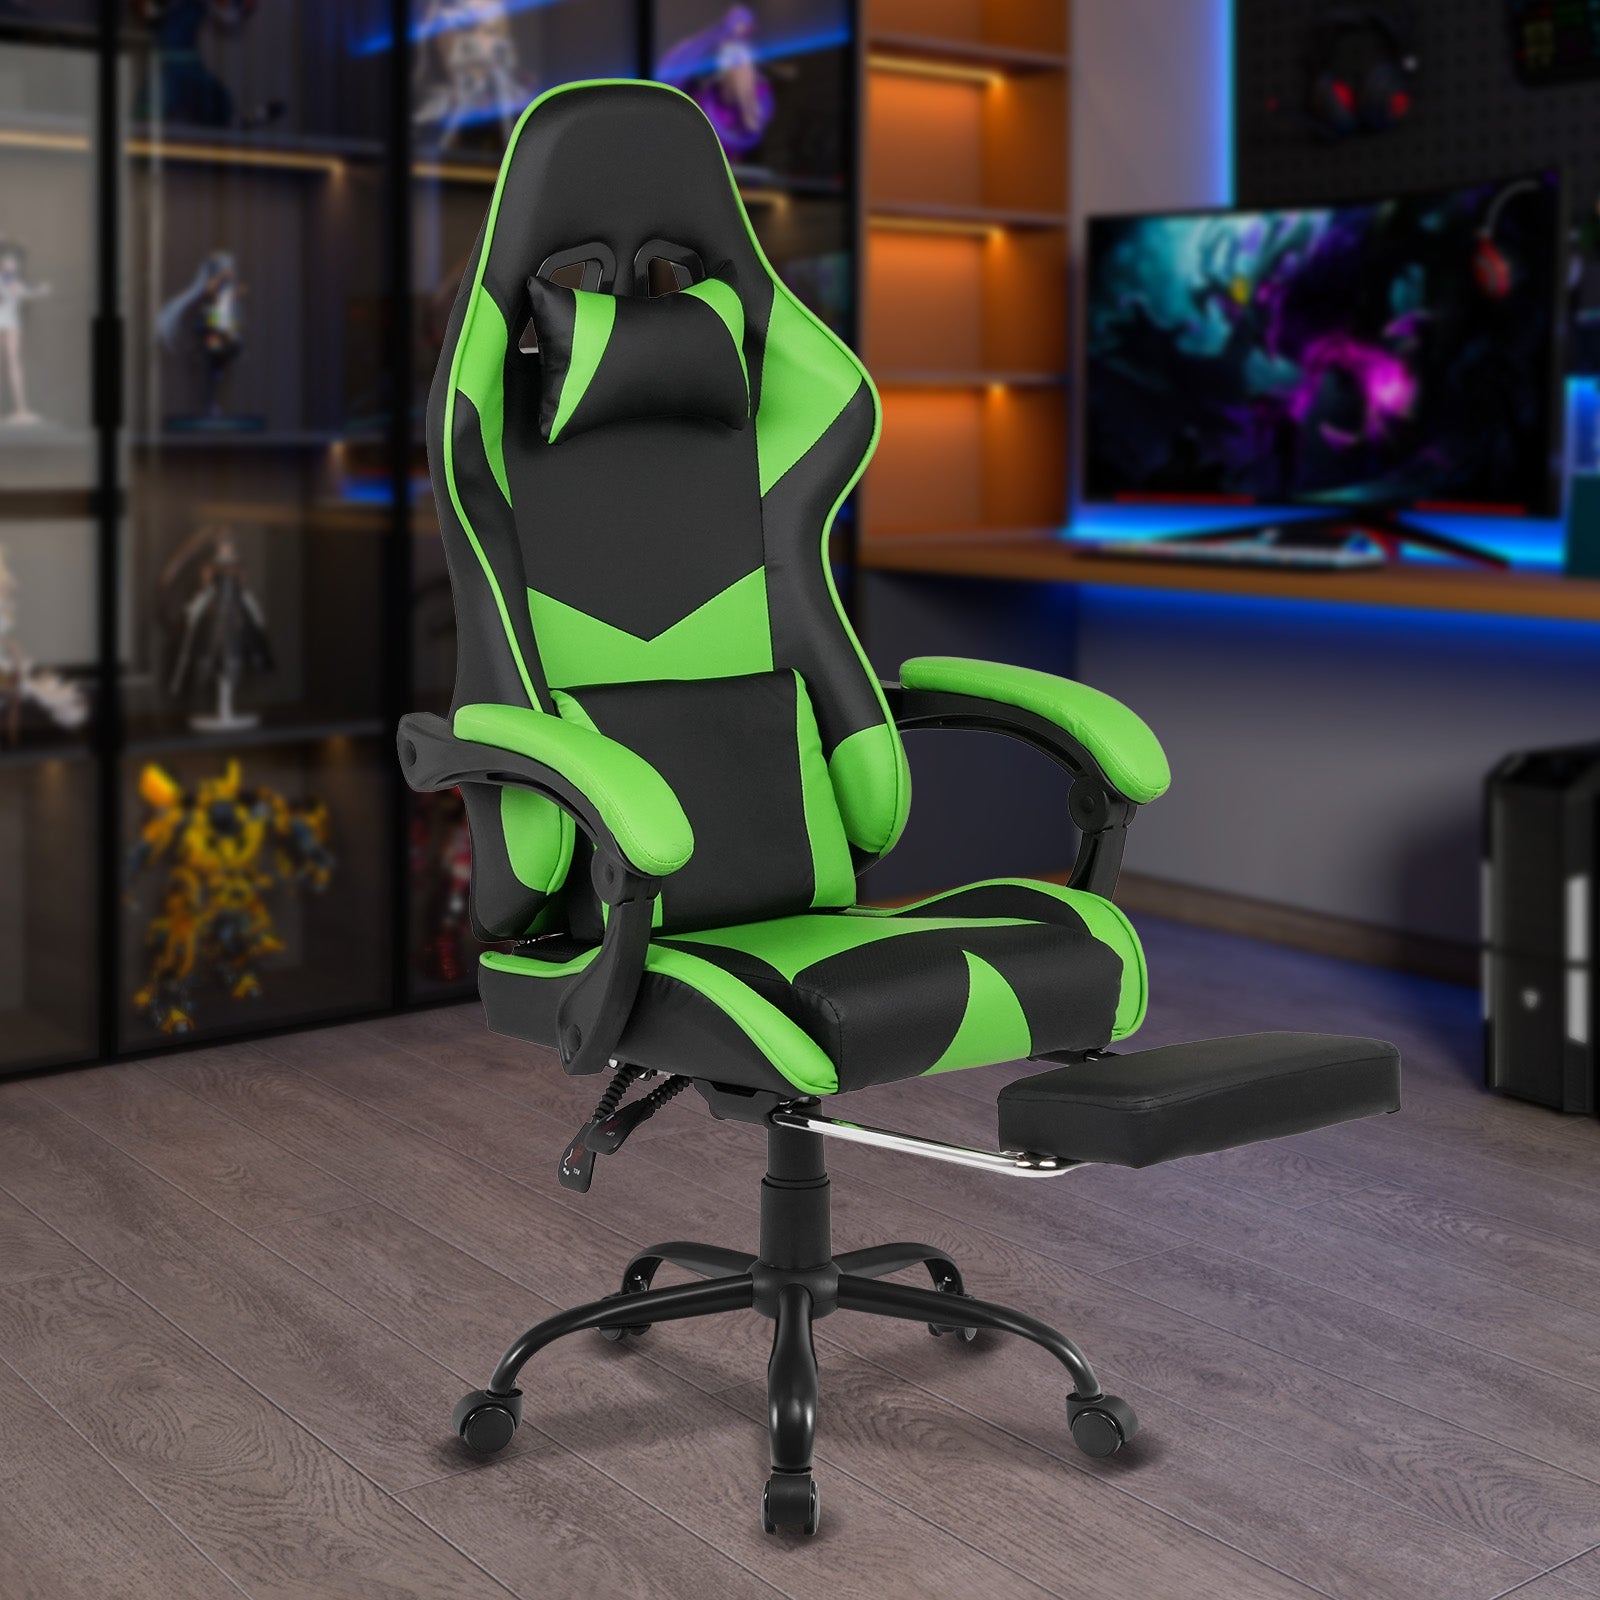 Advwin Gaming Office Chair Racing Recliner PU Leather Executive Seat with Footrest in Green & Black